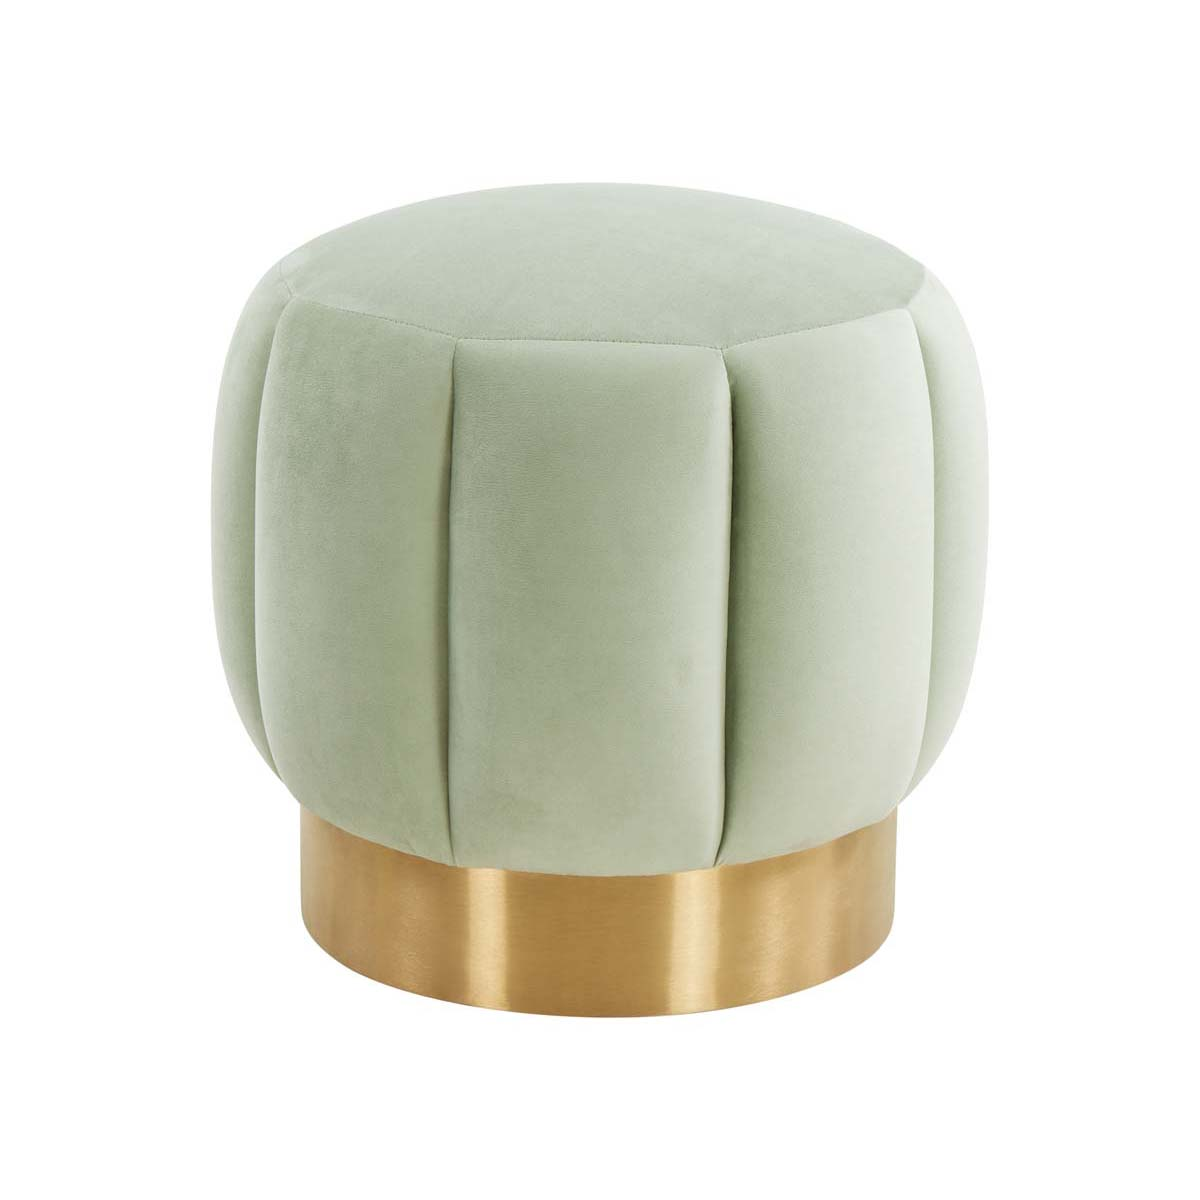 Safavieh Couture Maxine Channel Tufted Otttoman - Mint